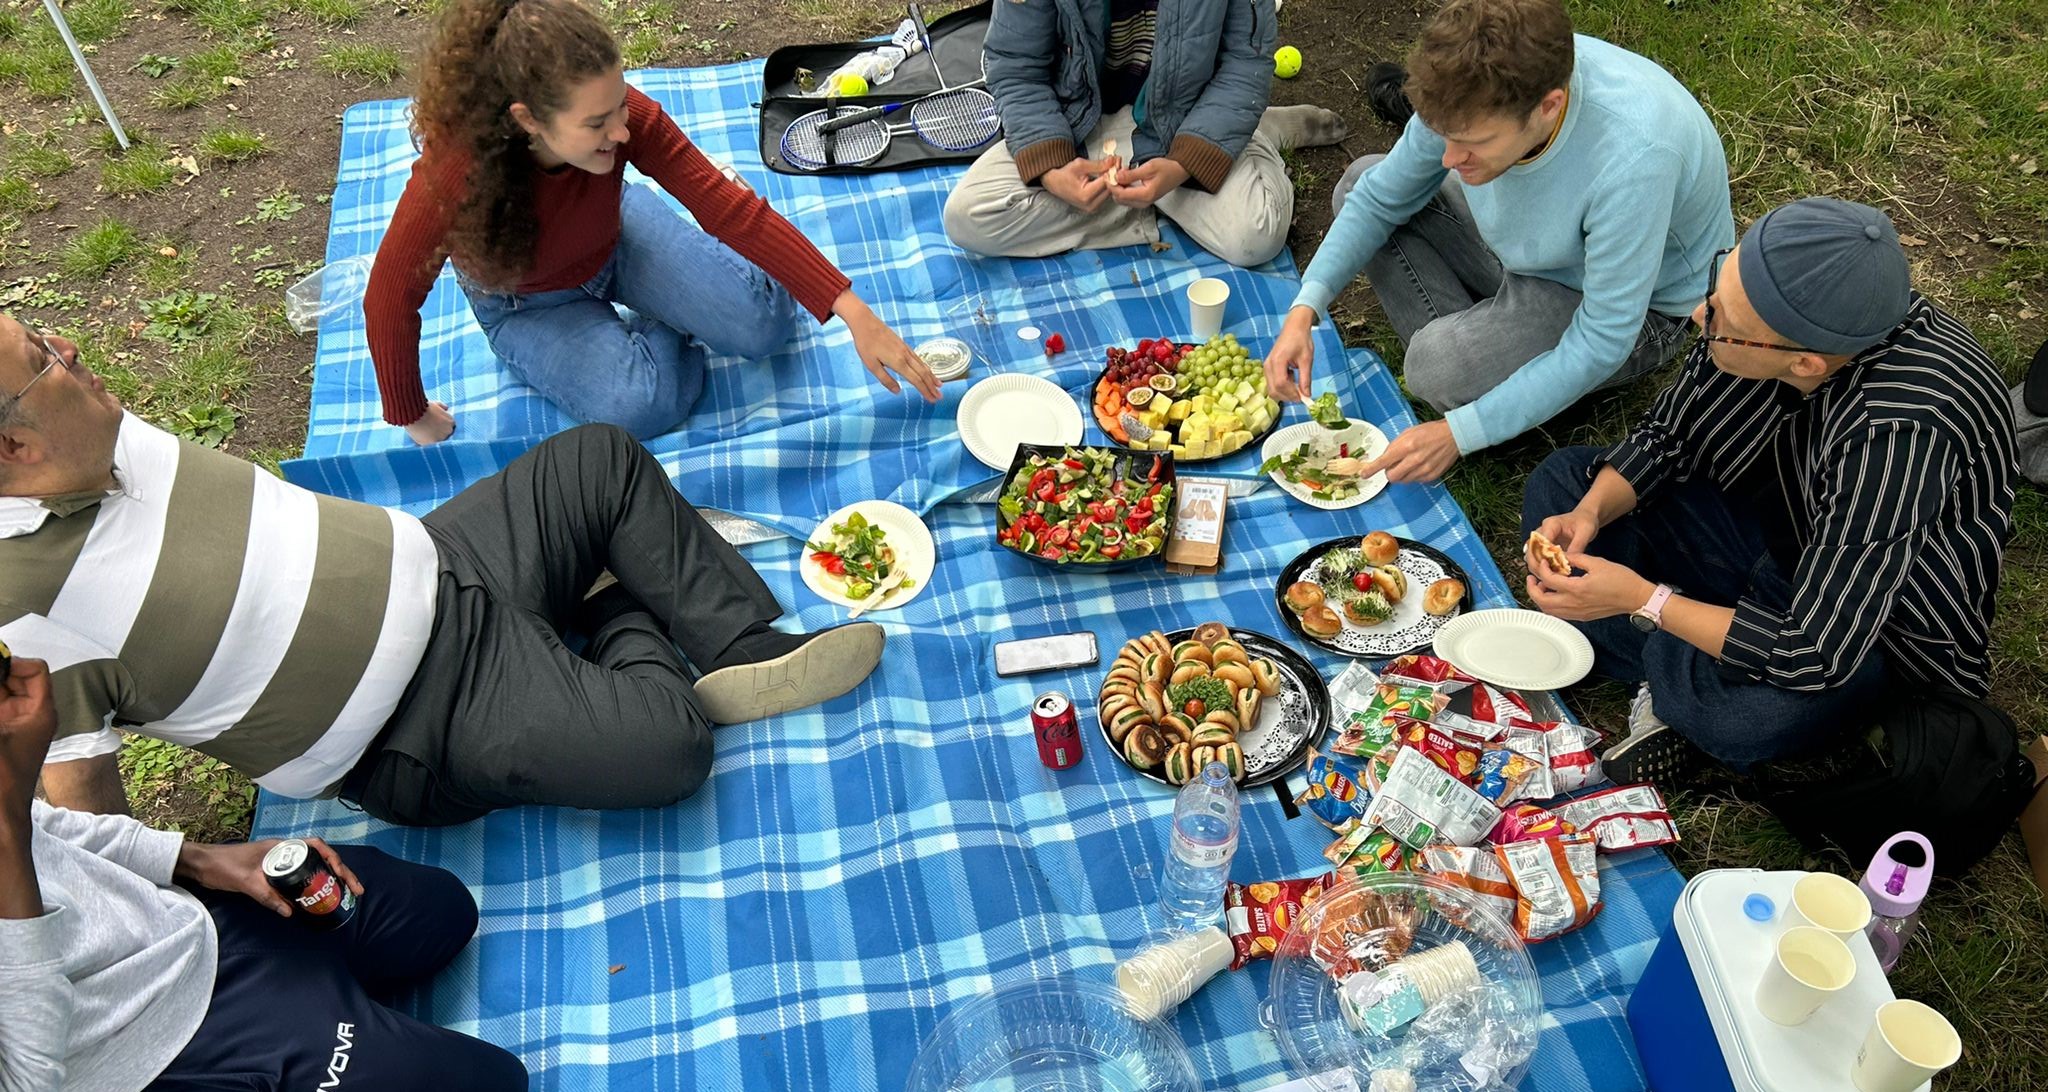 HIAS+JCORE staff, JUMP befrienders and young people sit on a blanket at the 2023 JUMP summer picnic. They are talking and eating food together.